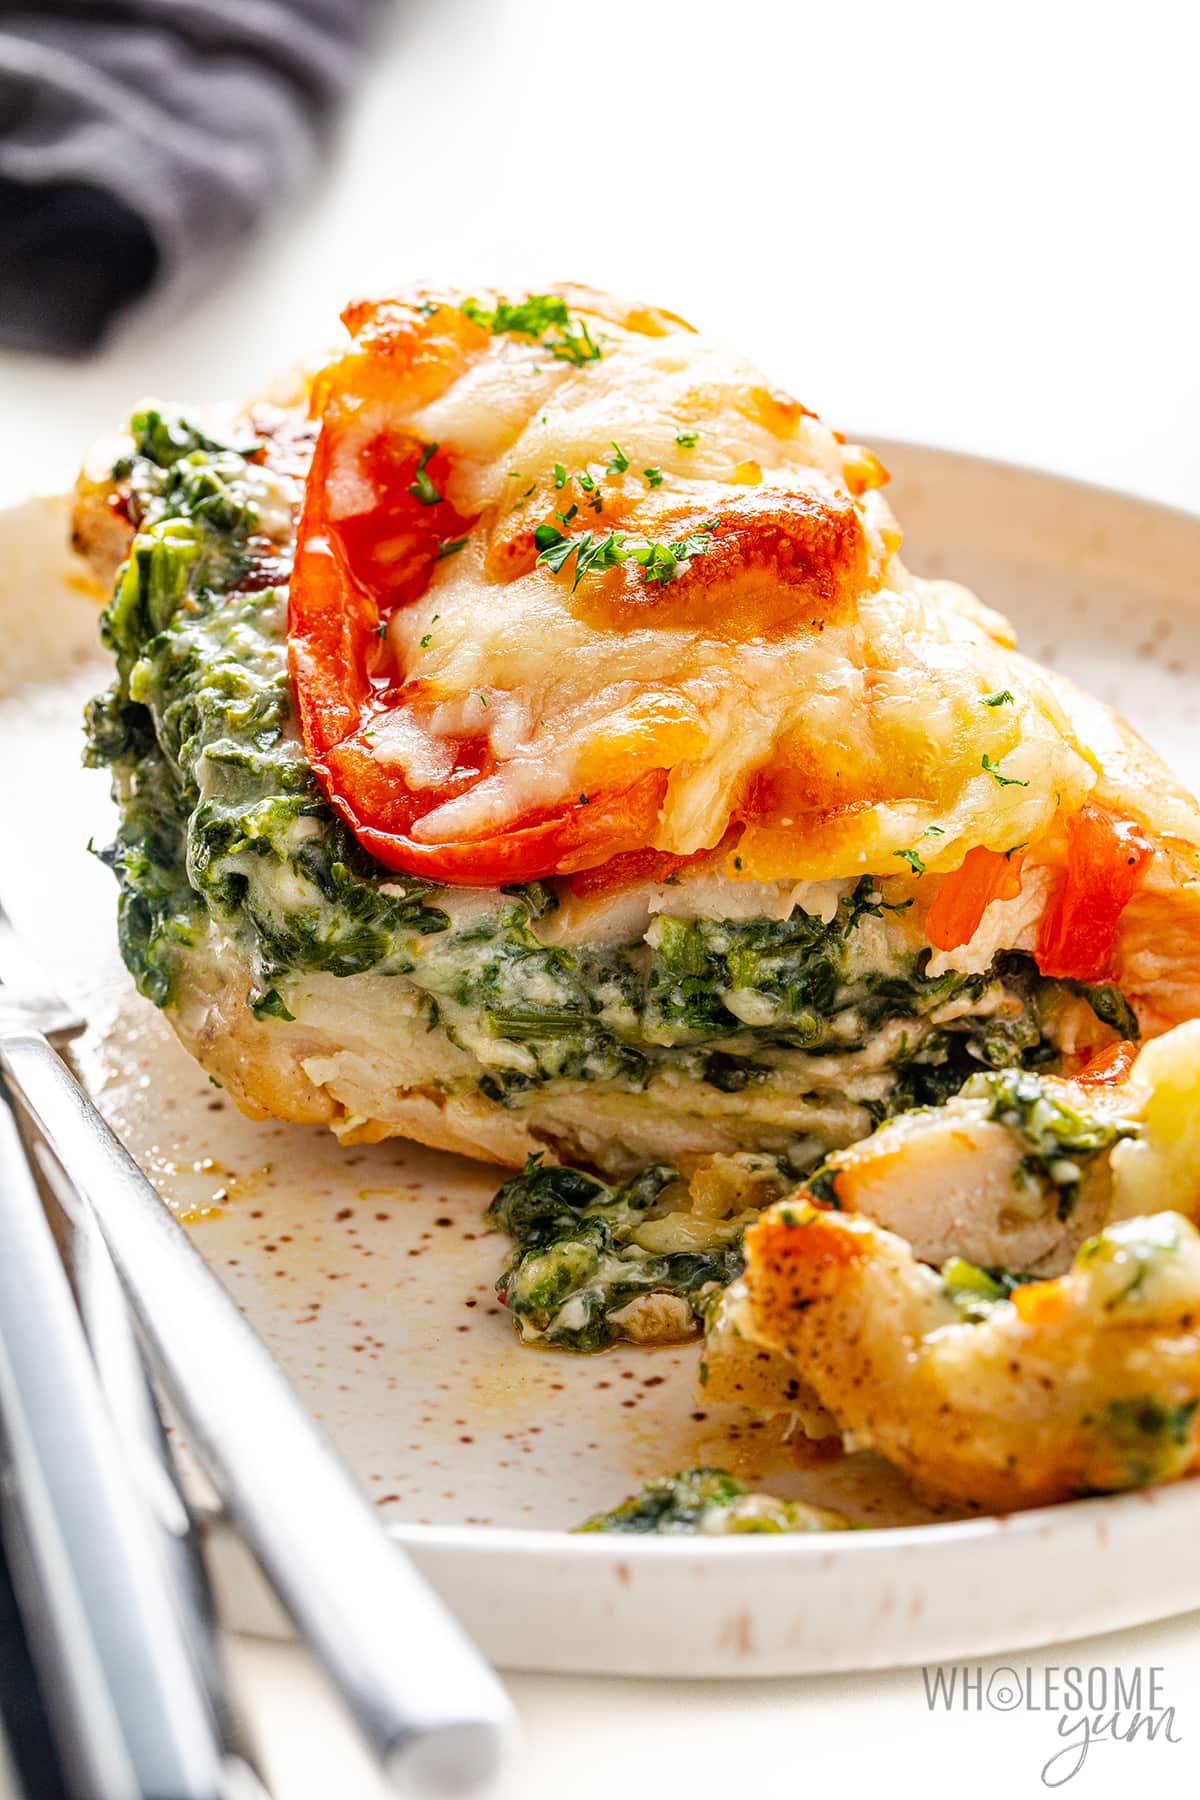 Spinach stuffed chicken sliced on a plate.